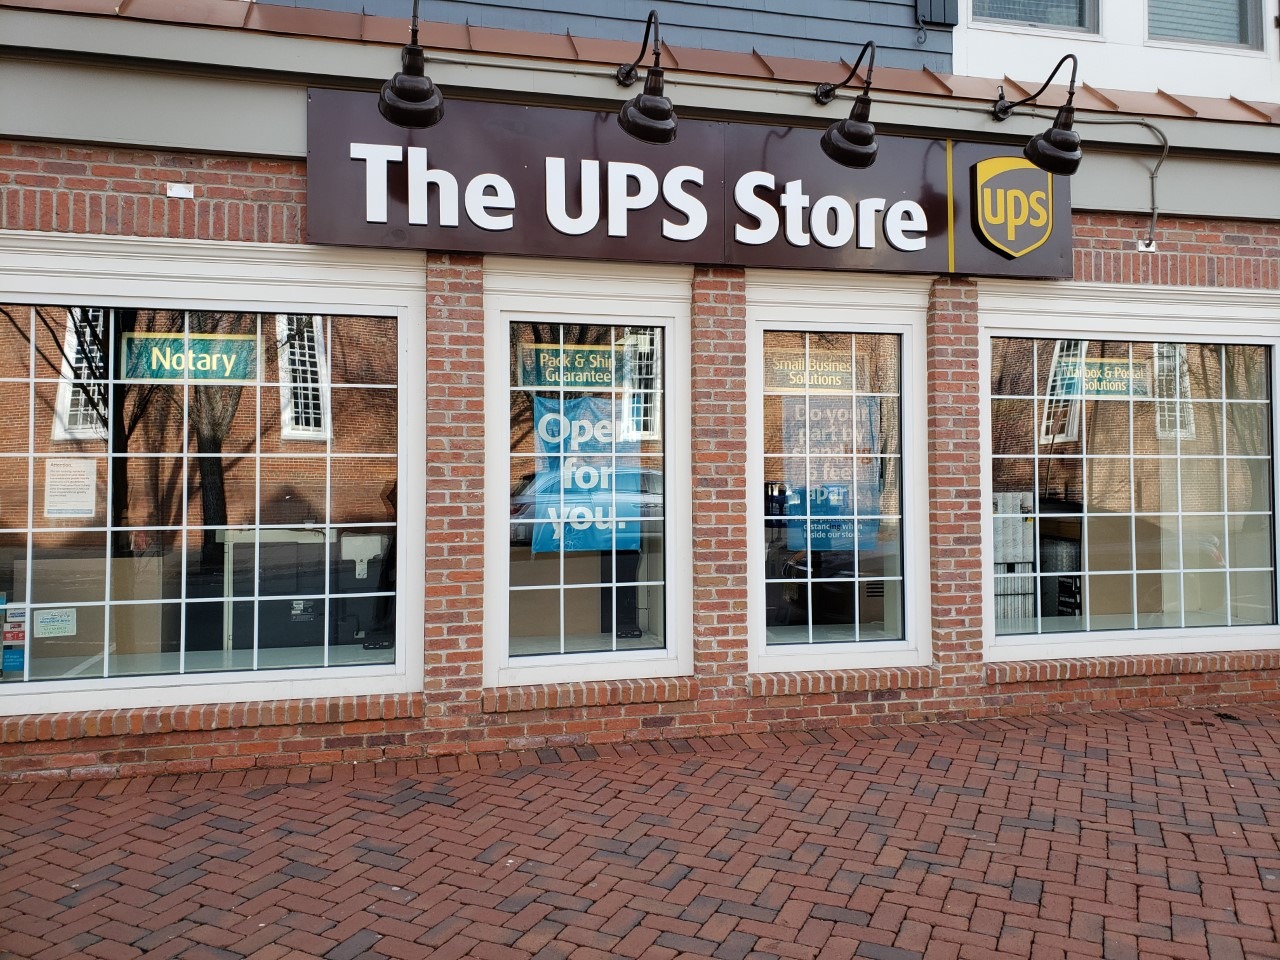 Facade of The UPS Store Westfield